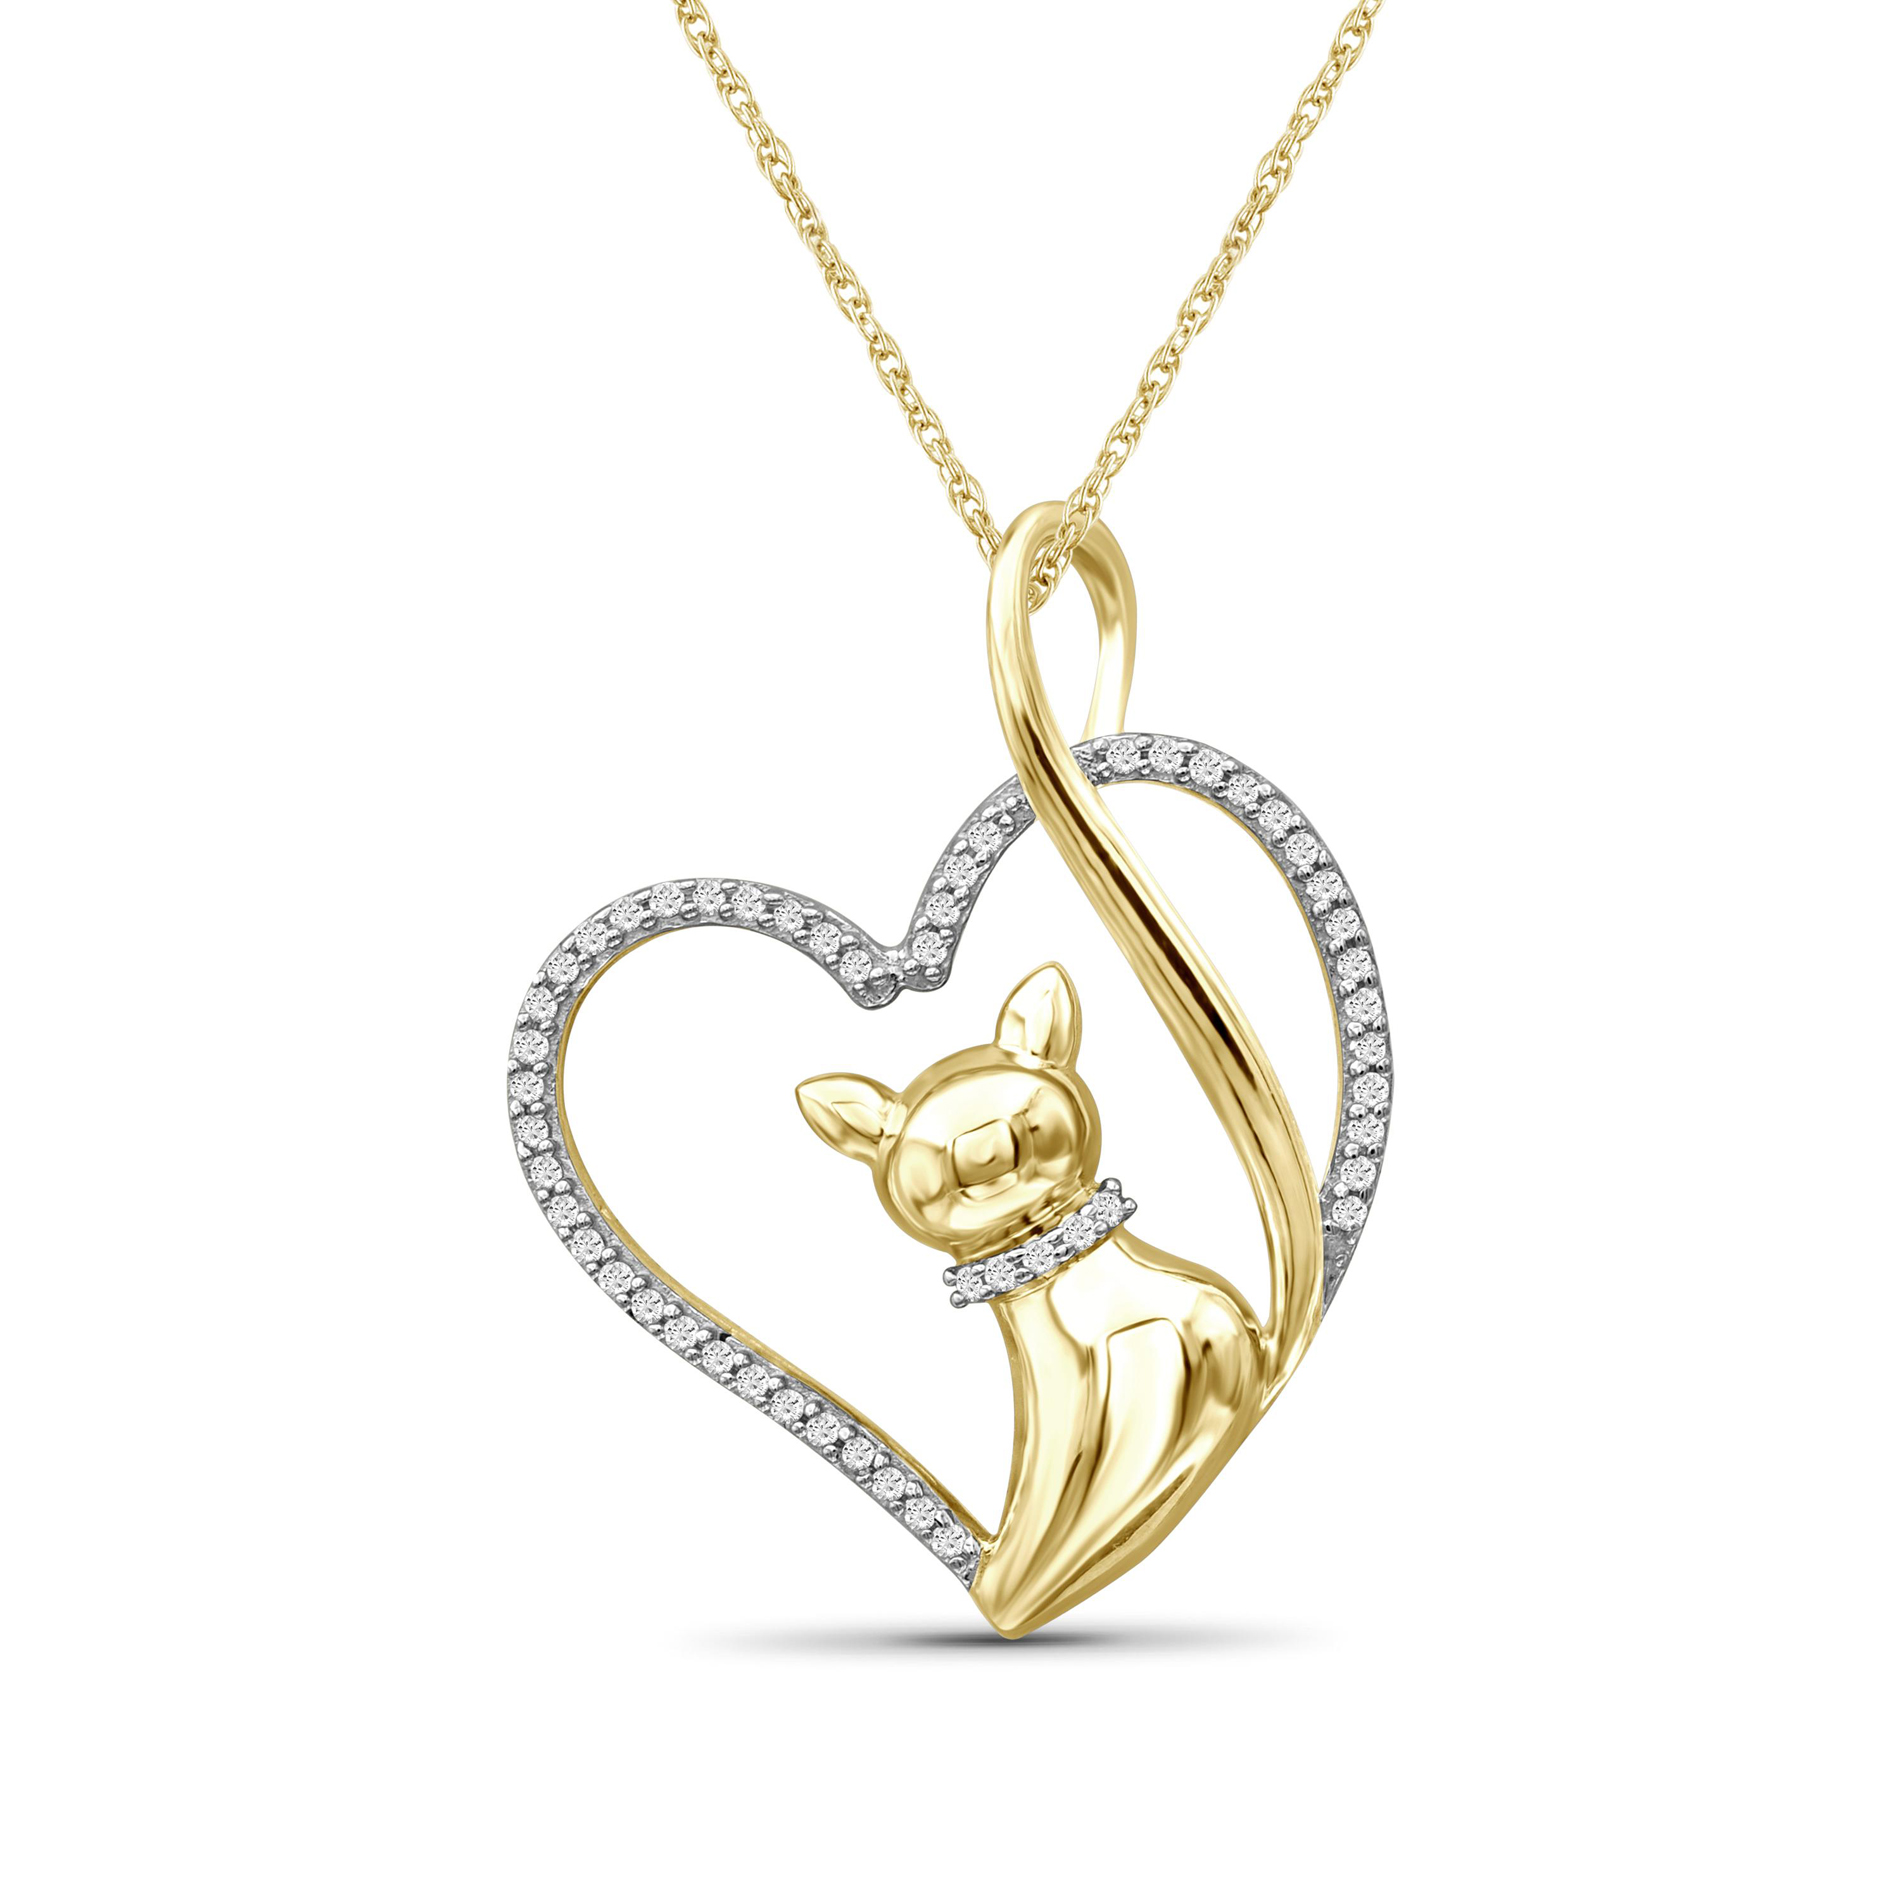 Love Heart with Cat Kitty Pendant Necklace in 14K Gold Over Sterling Silver 18 Chain 